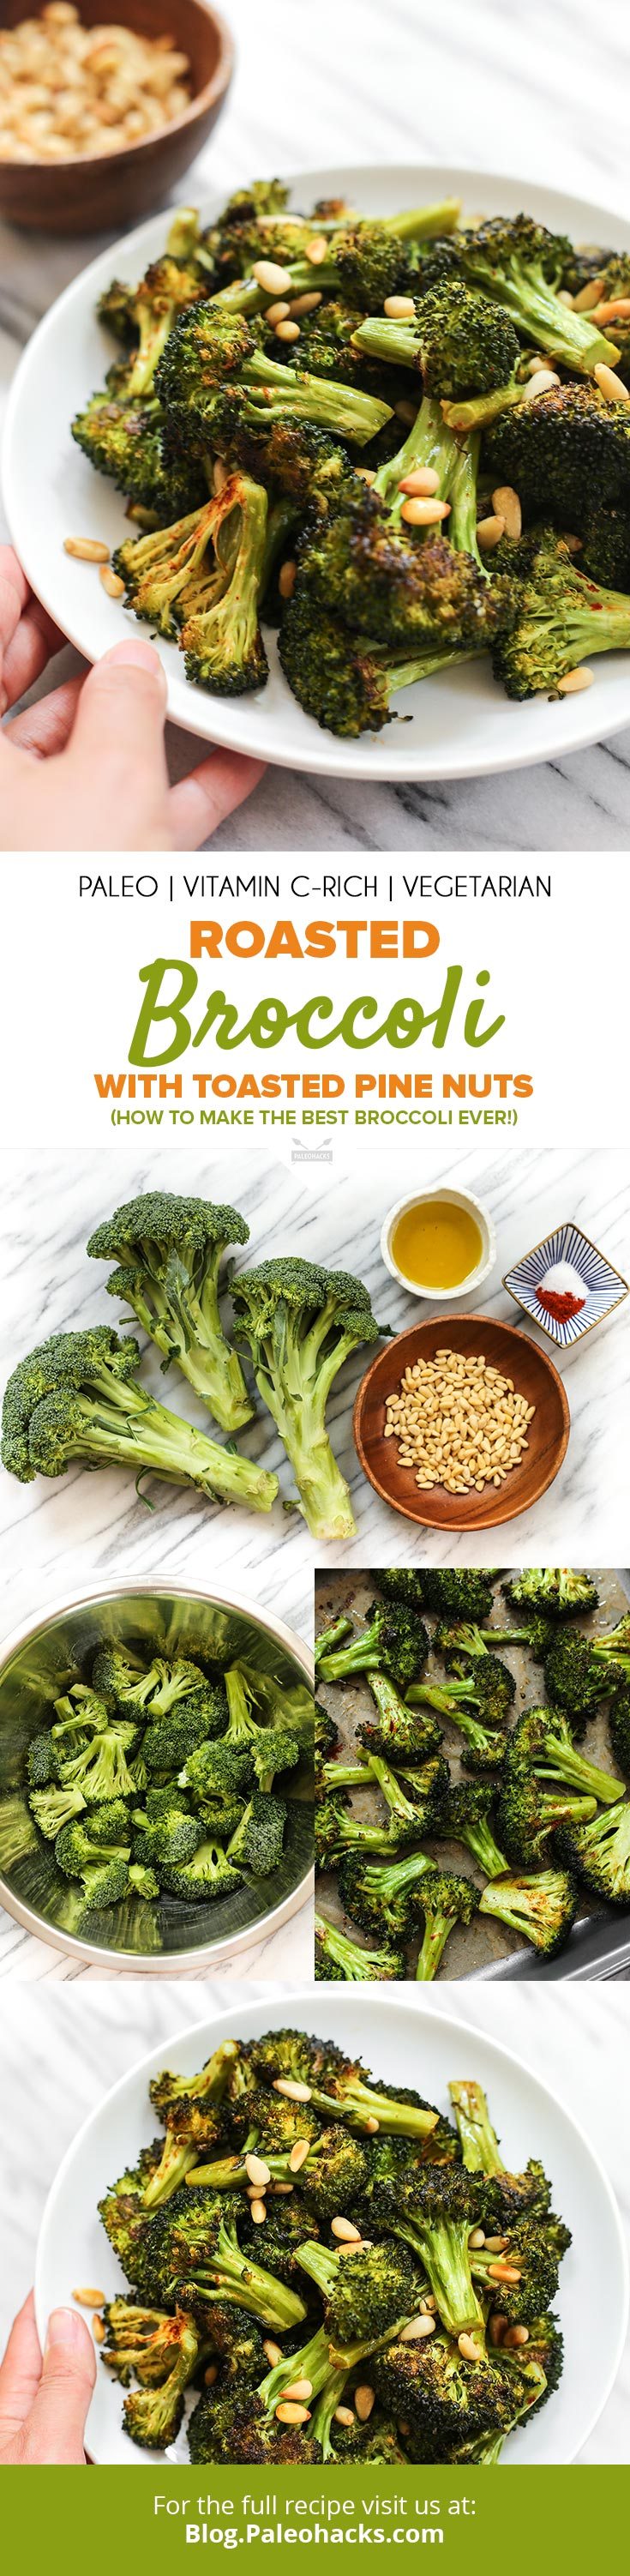 For a deliciously healthy side dish, oven-roast broccoli florets until tender and top with crunchy toasted pine nuts!